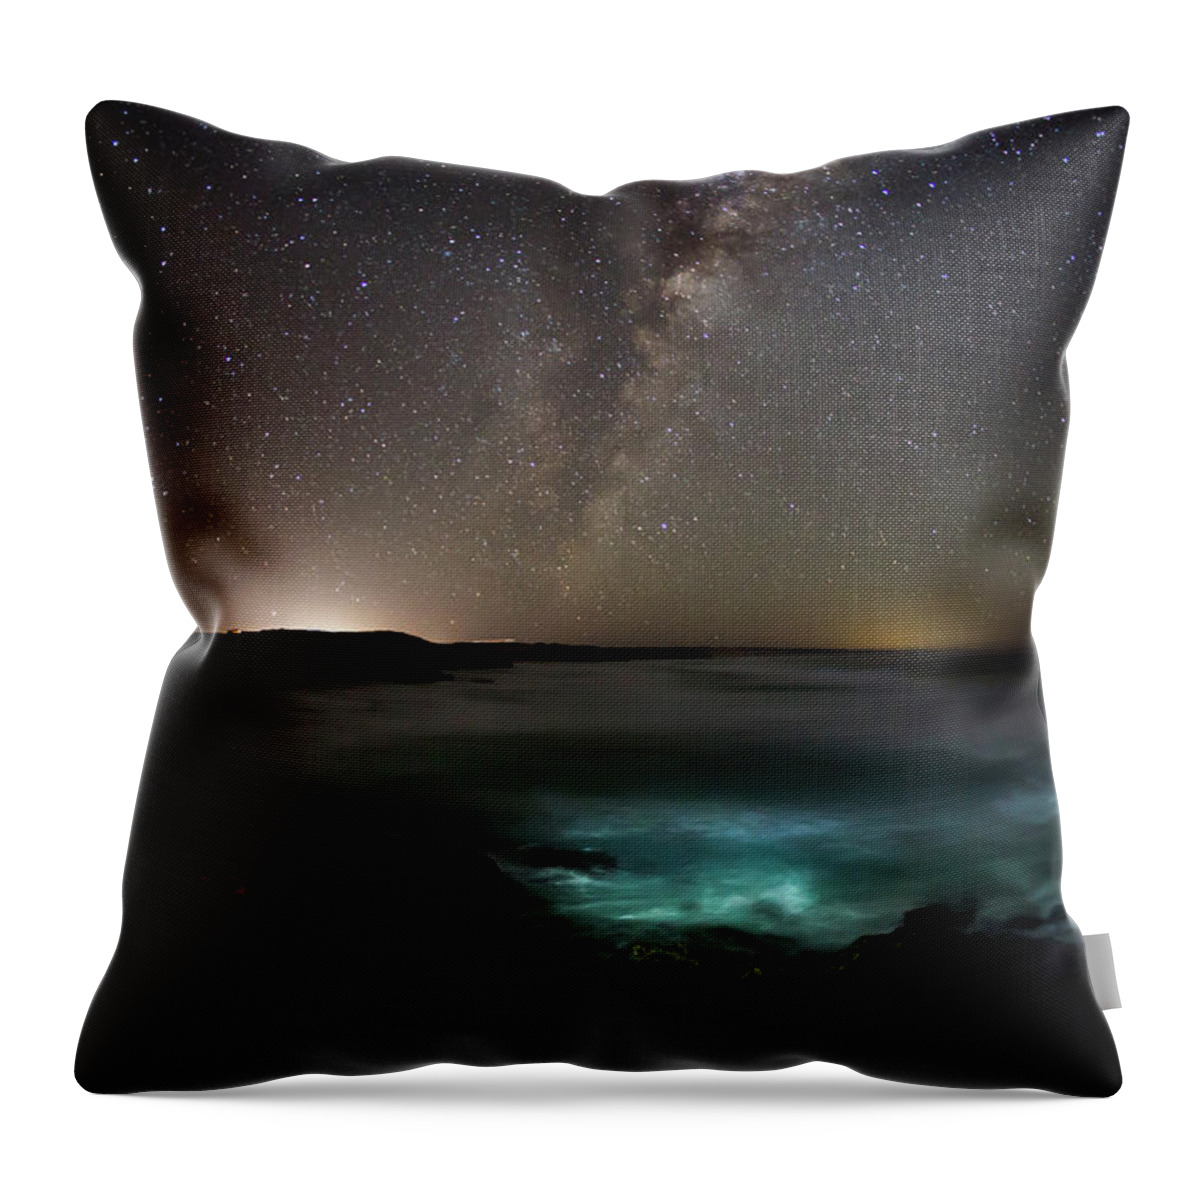 Tranquility Throw Pillow featuring the photograph Milky Way Over The Ocean. South by John White Photos